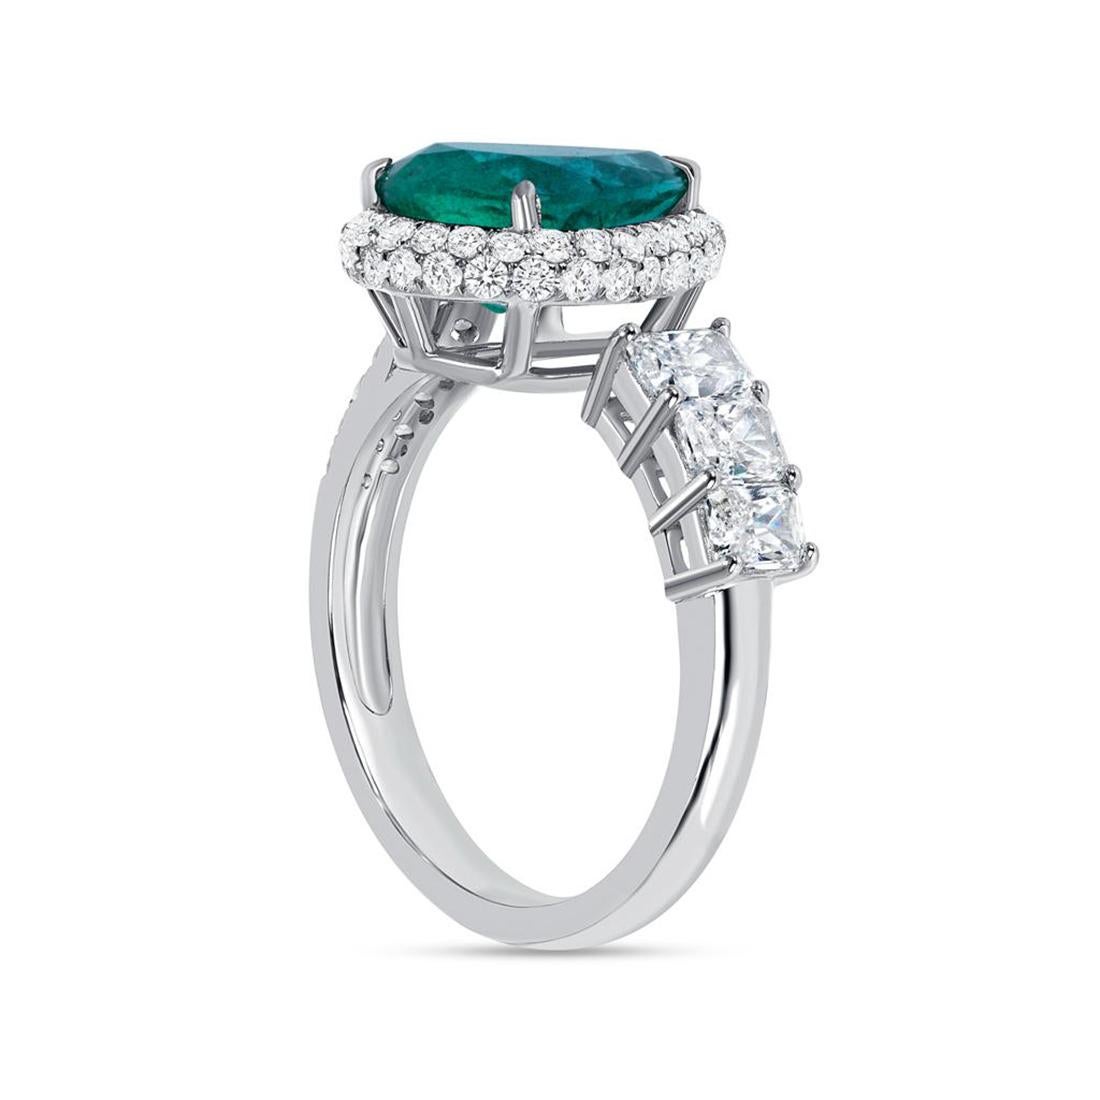 2.67 CT Zambian Emerald & 1.10 CT Diamonds in 14K White Gold Engagement Ring For Sale 5